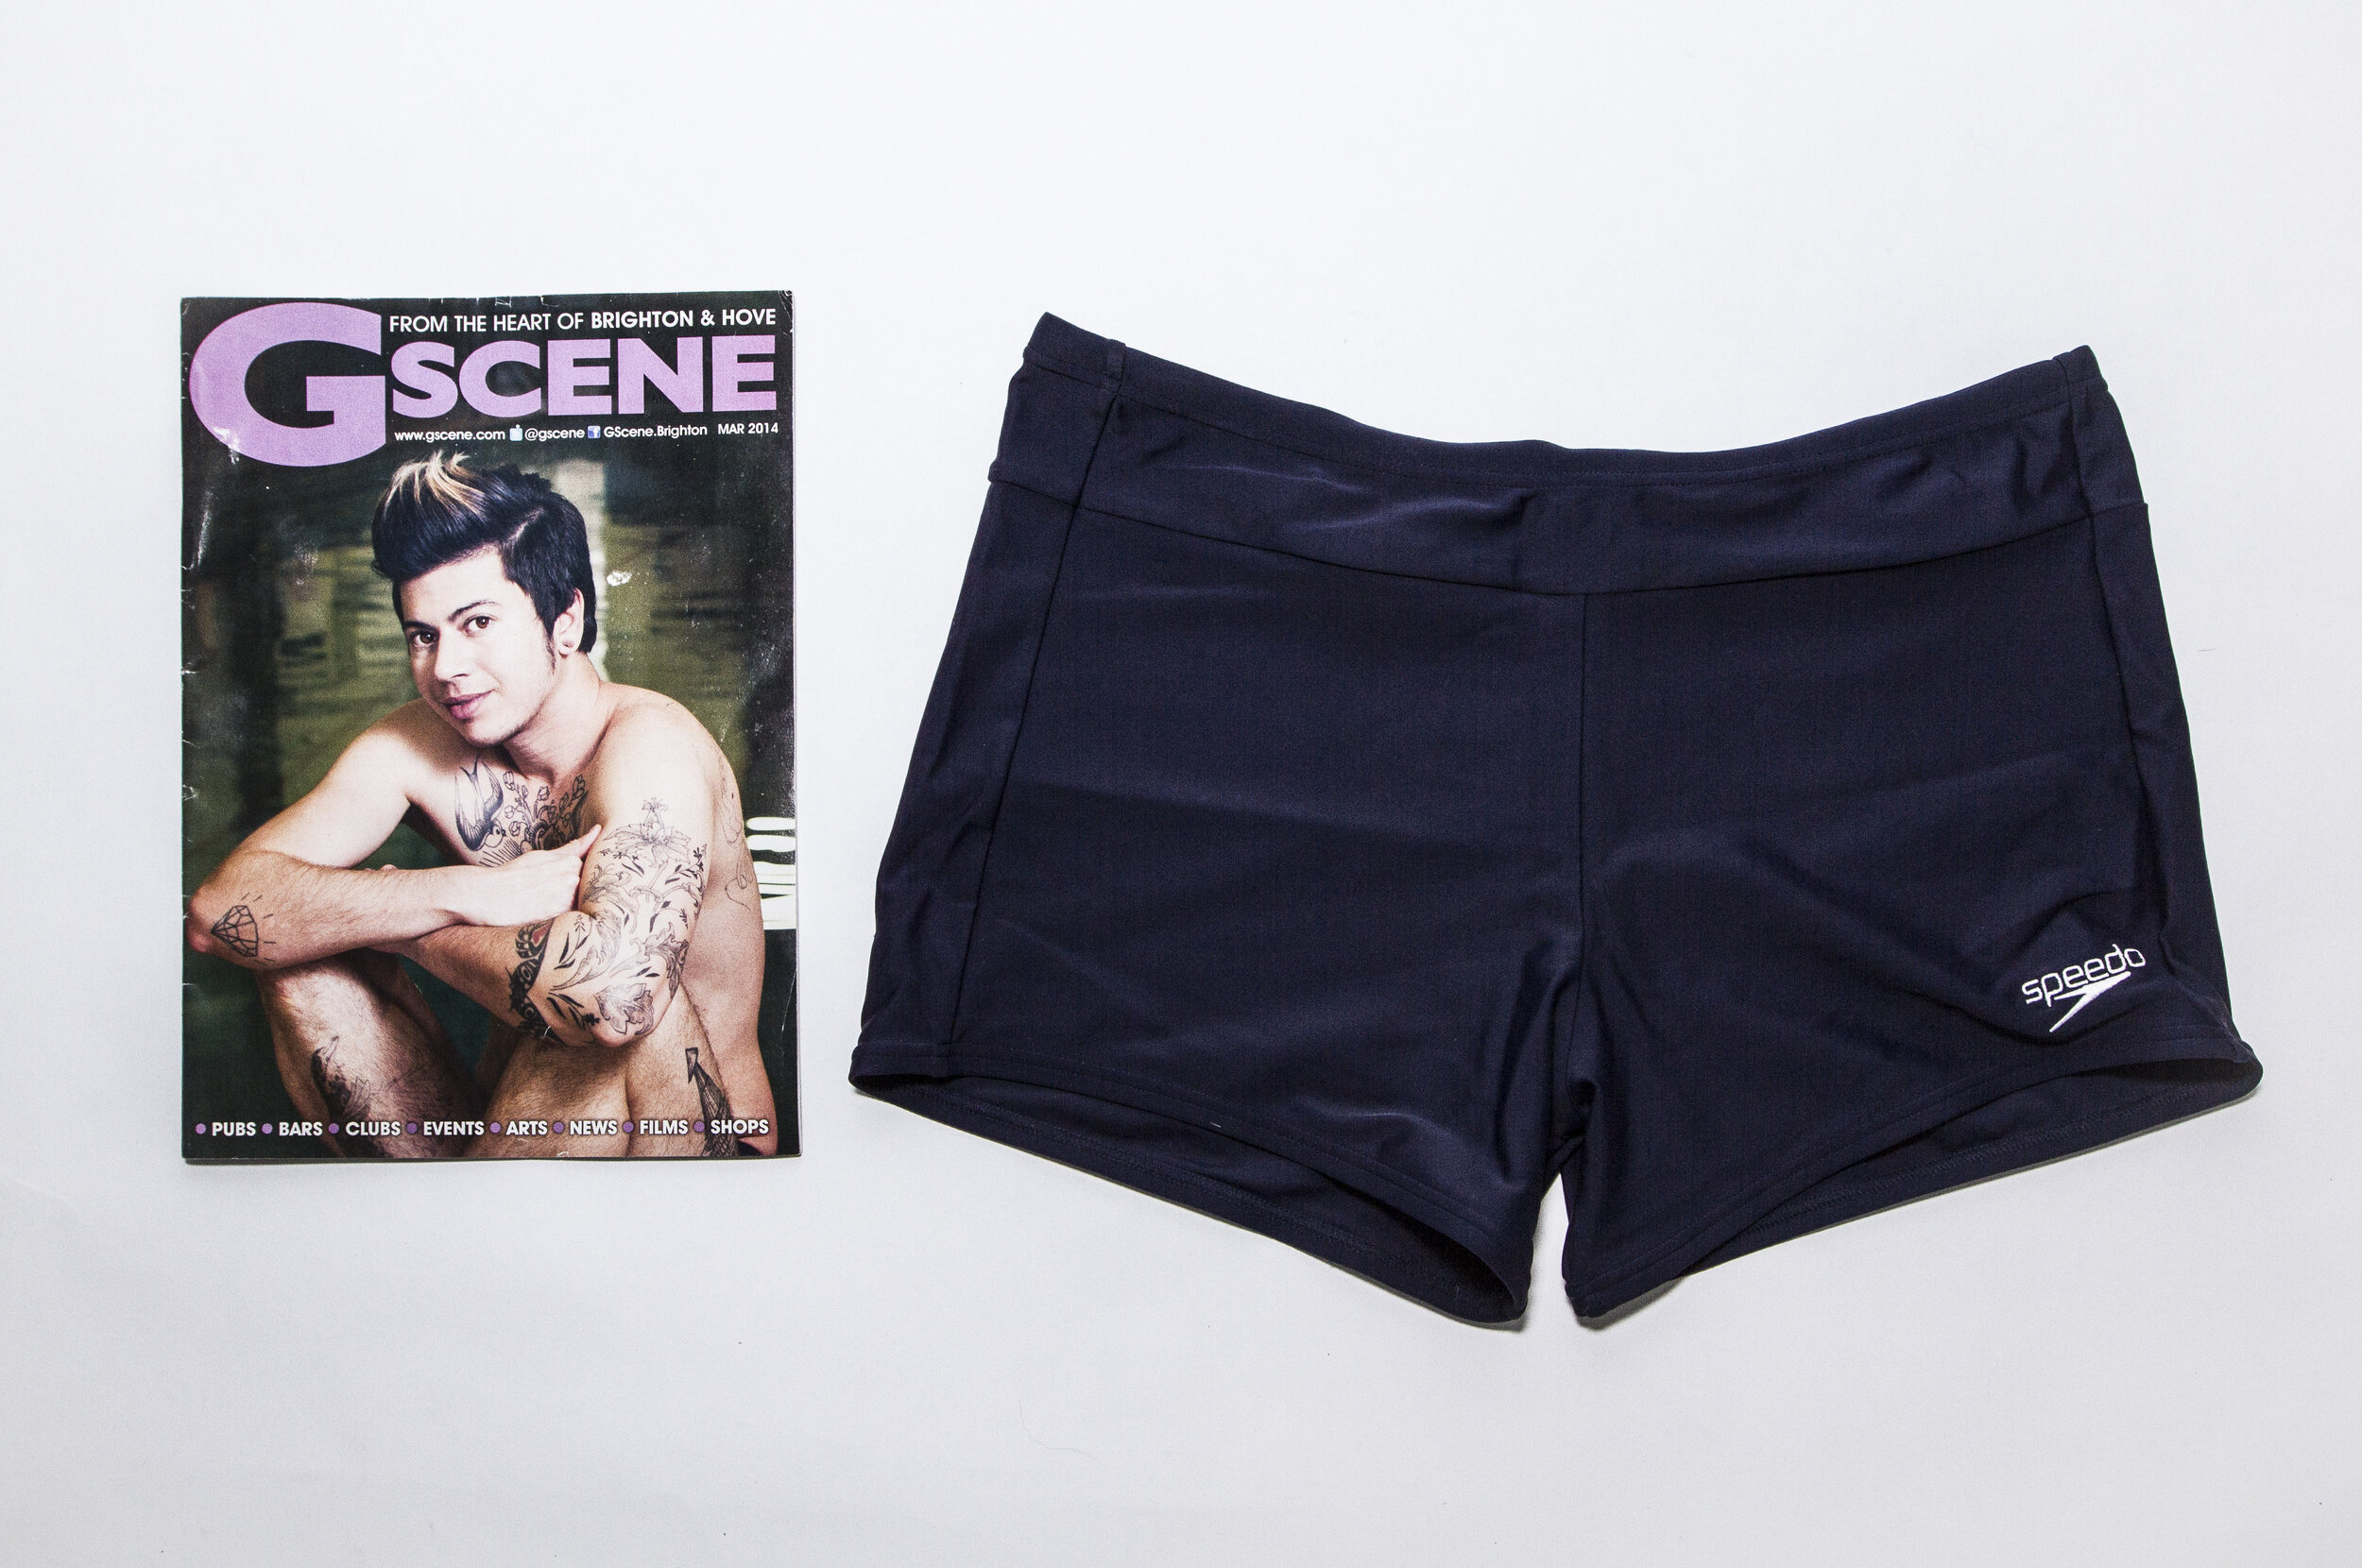 G Scene Magazine And Trunks Worn On Cover Museum Of Transology